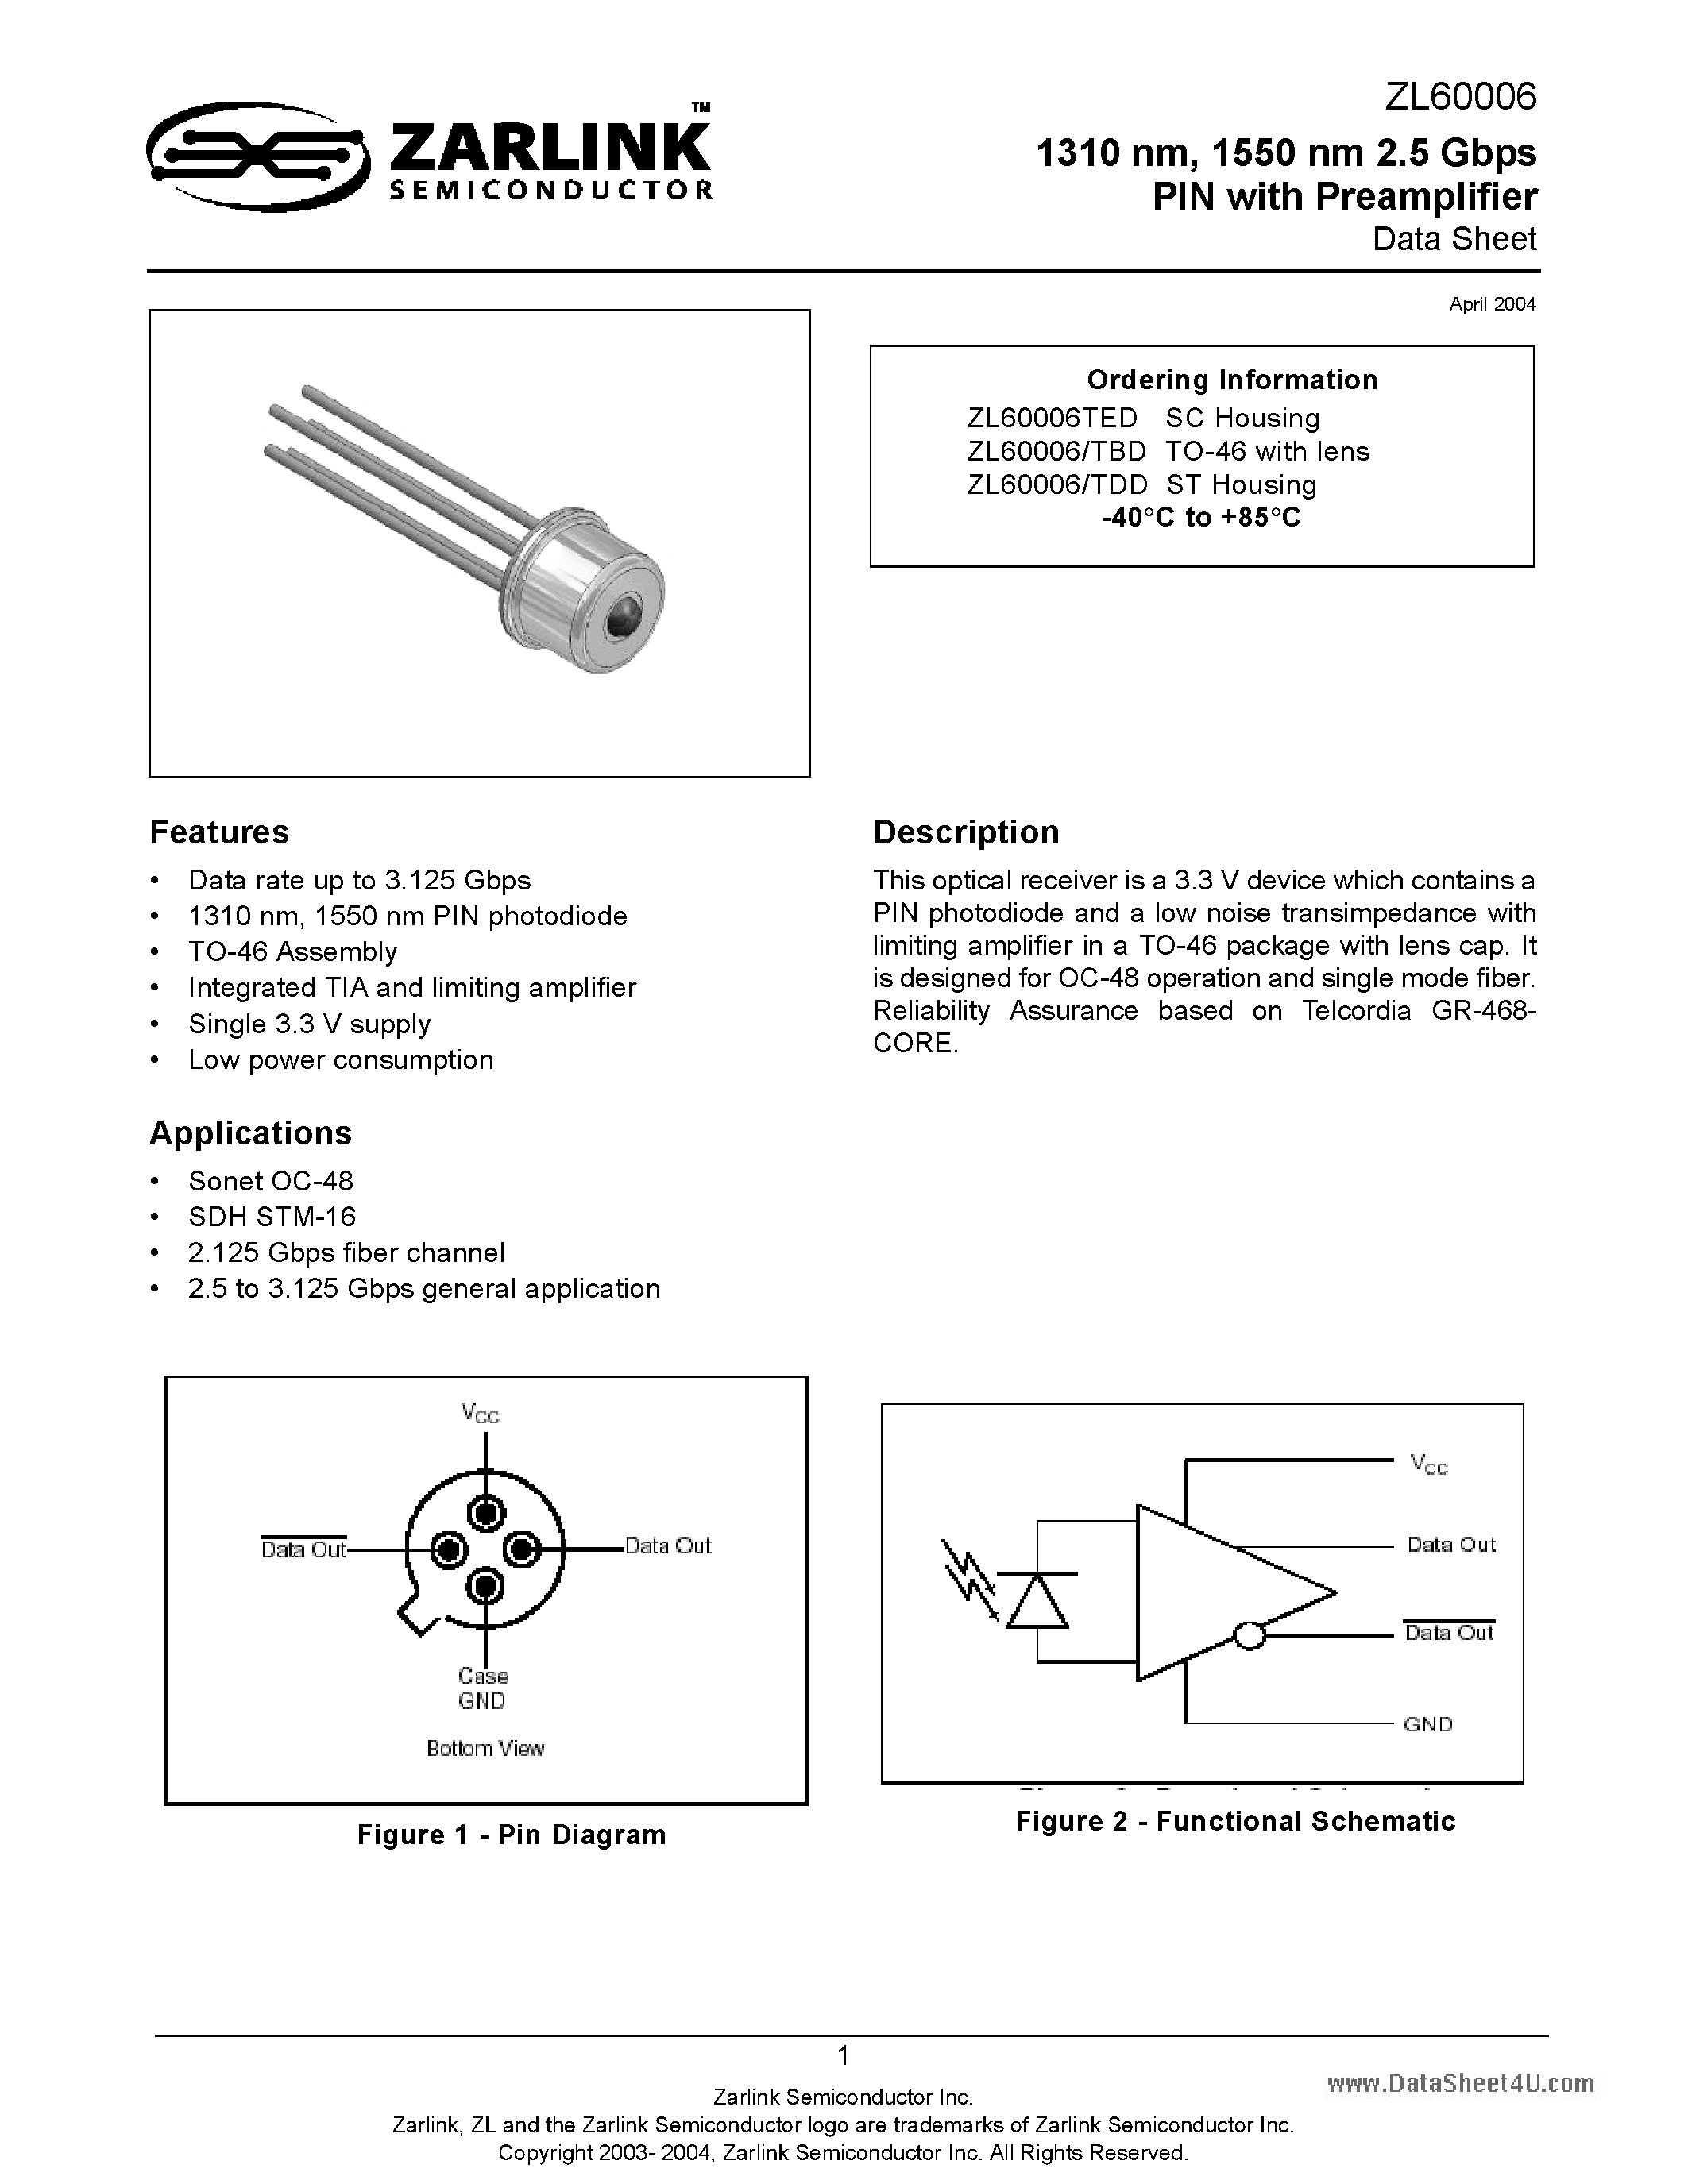 Datasheet ZL60006 - 2.5 Gbps PIN with Preamplifier page 1